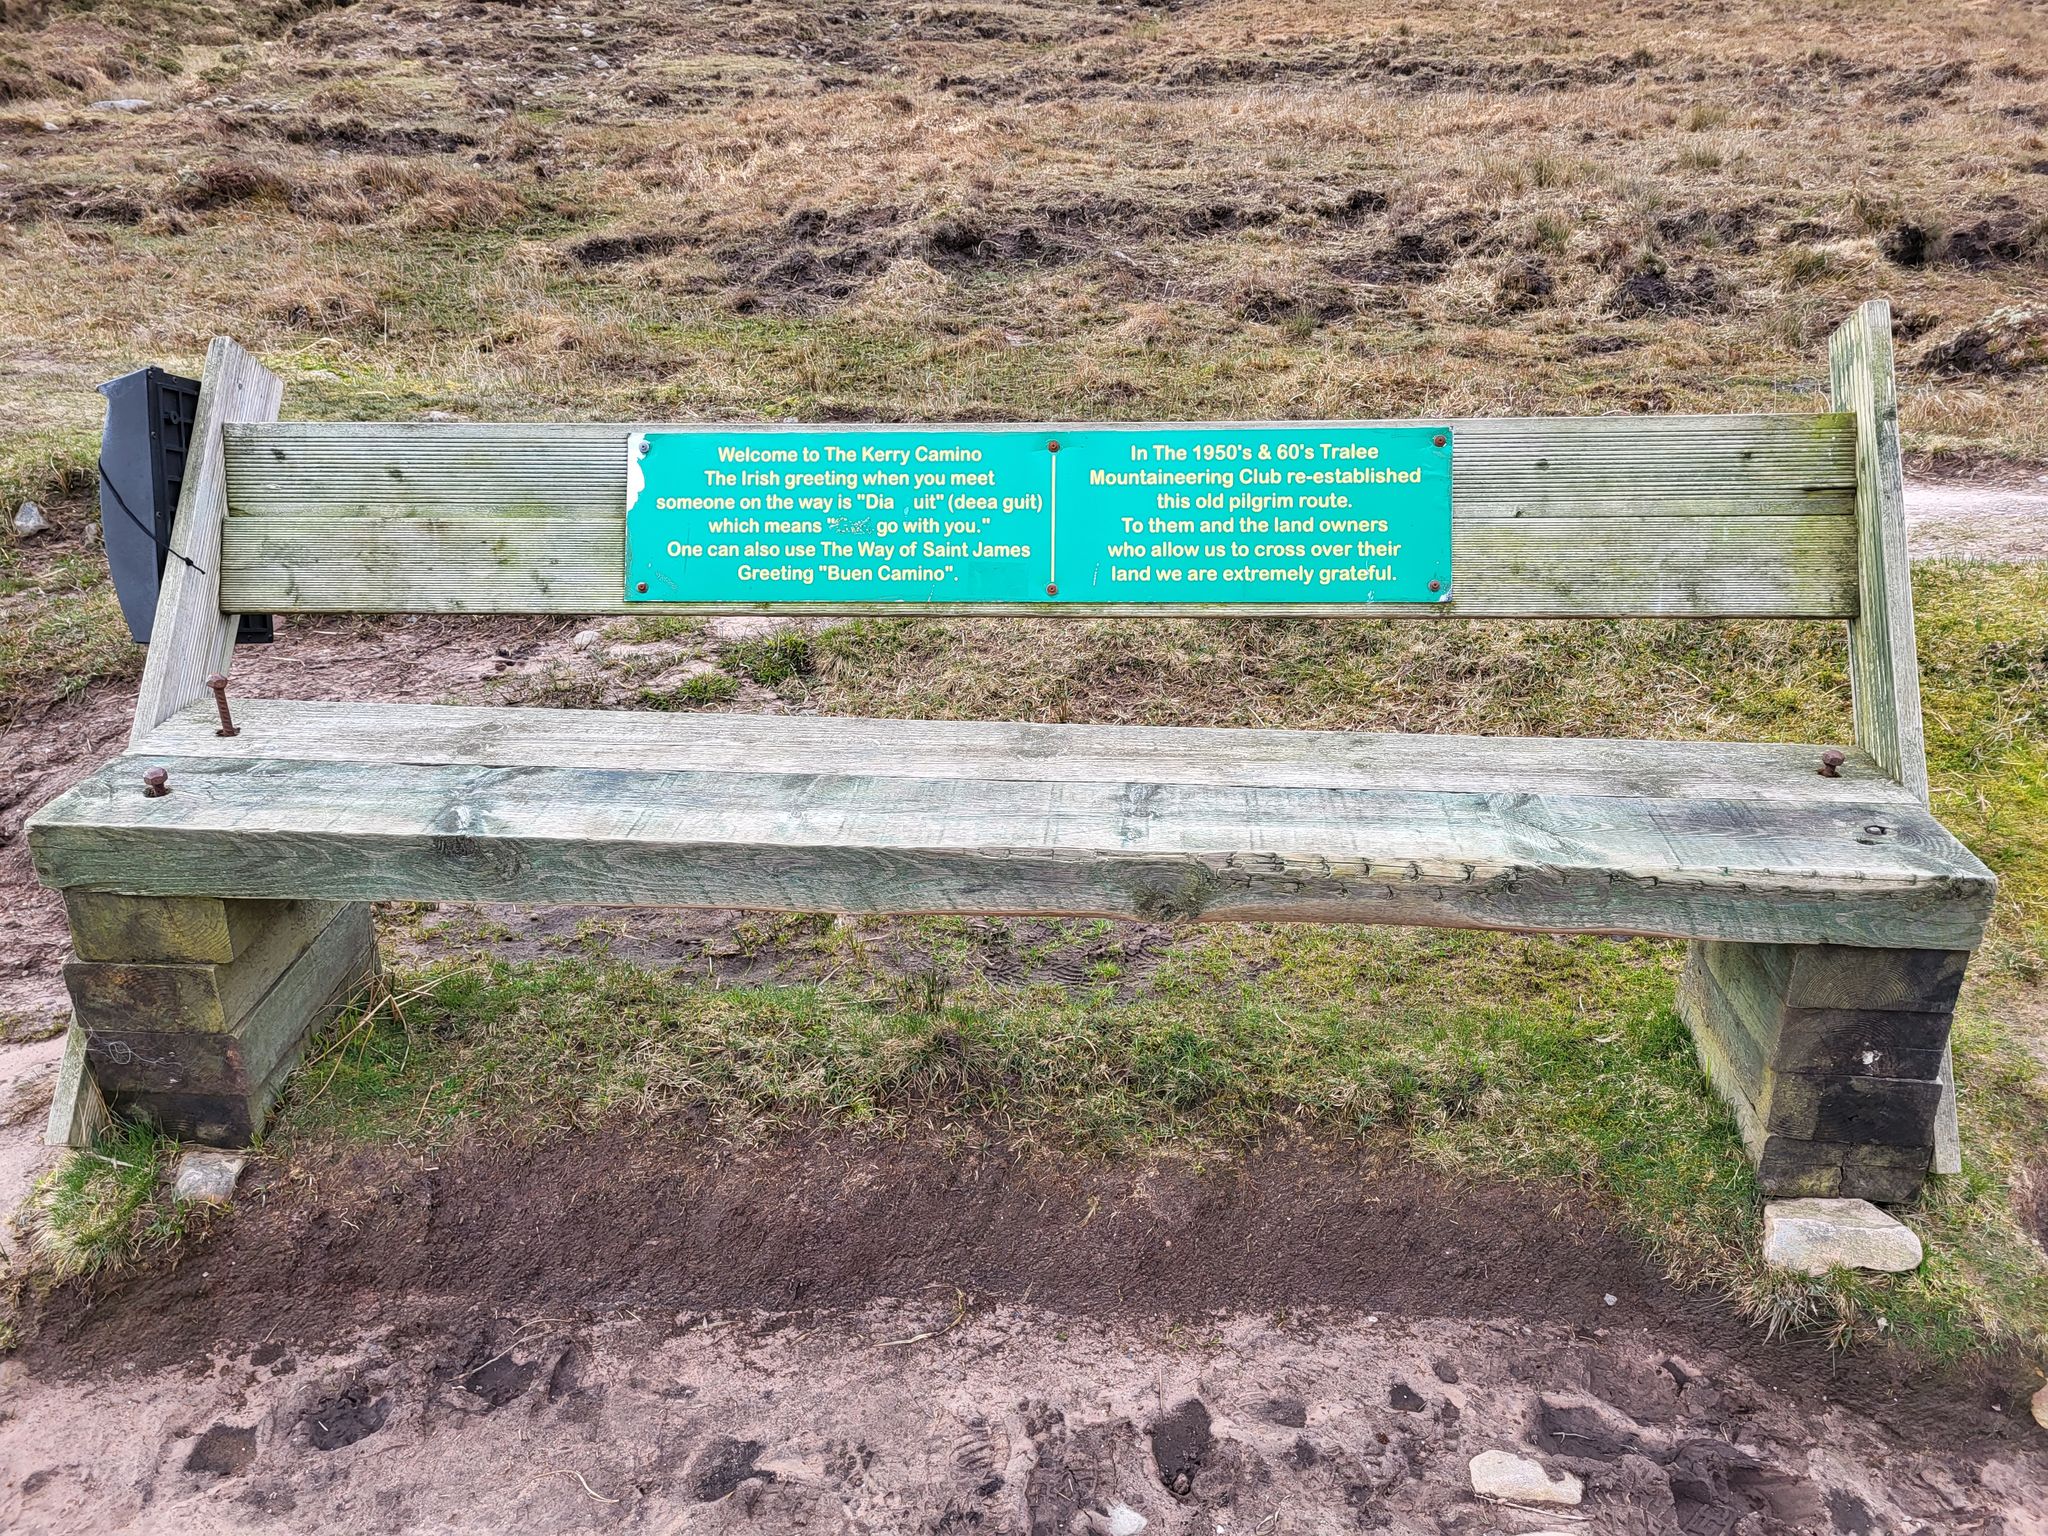 Bench welcoming walkers to the Kerry Camino